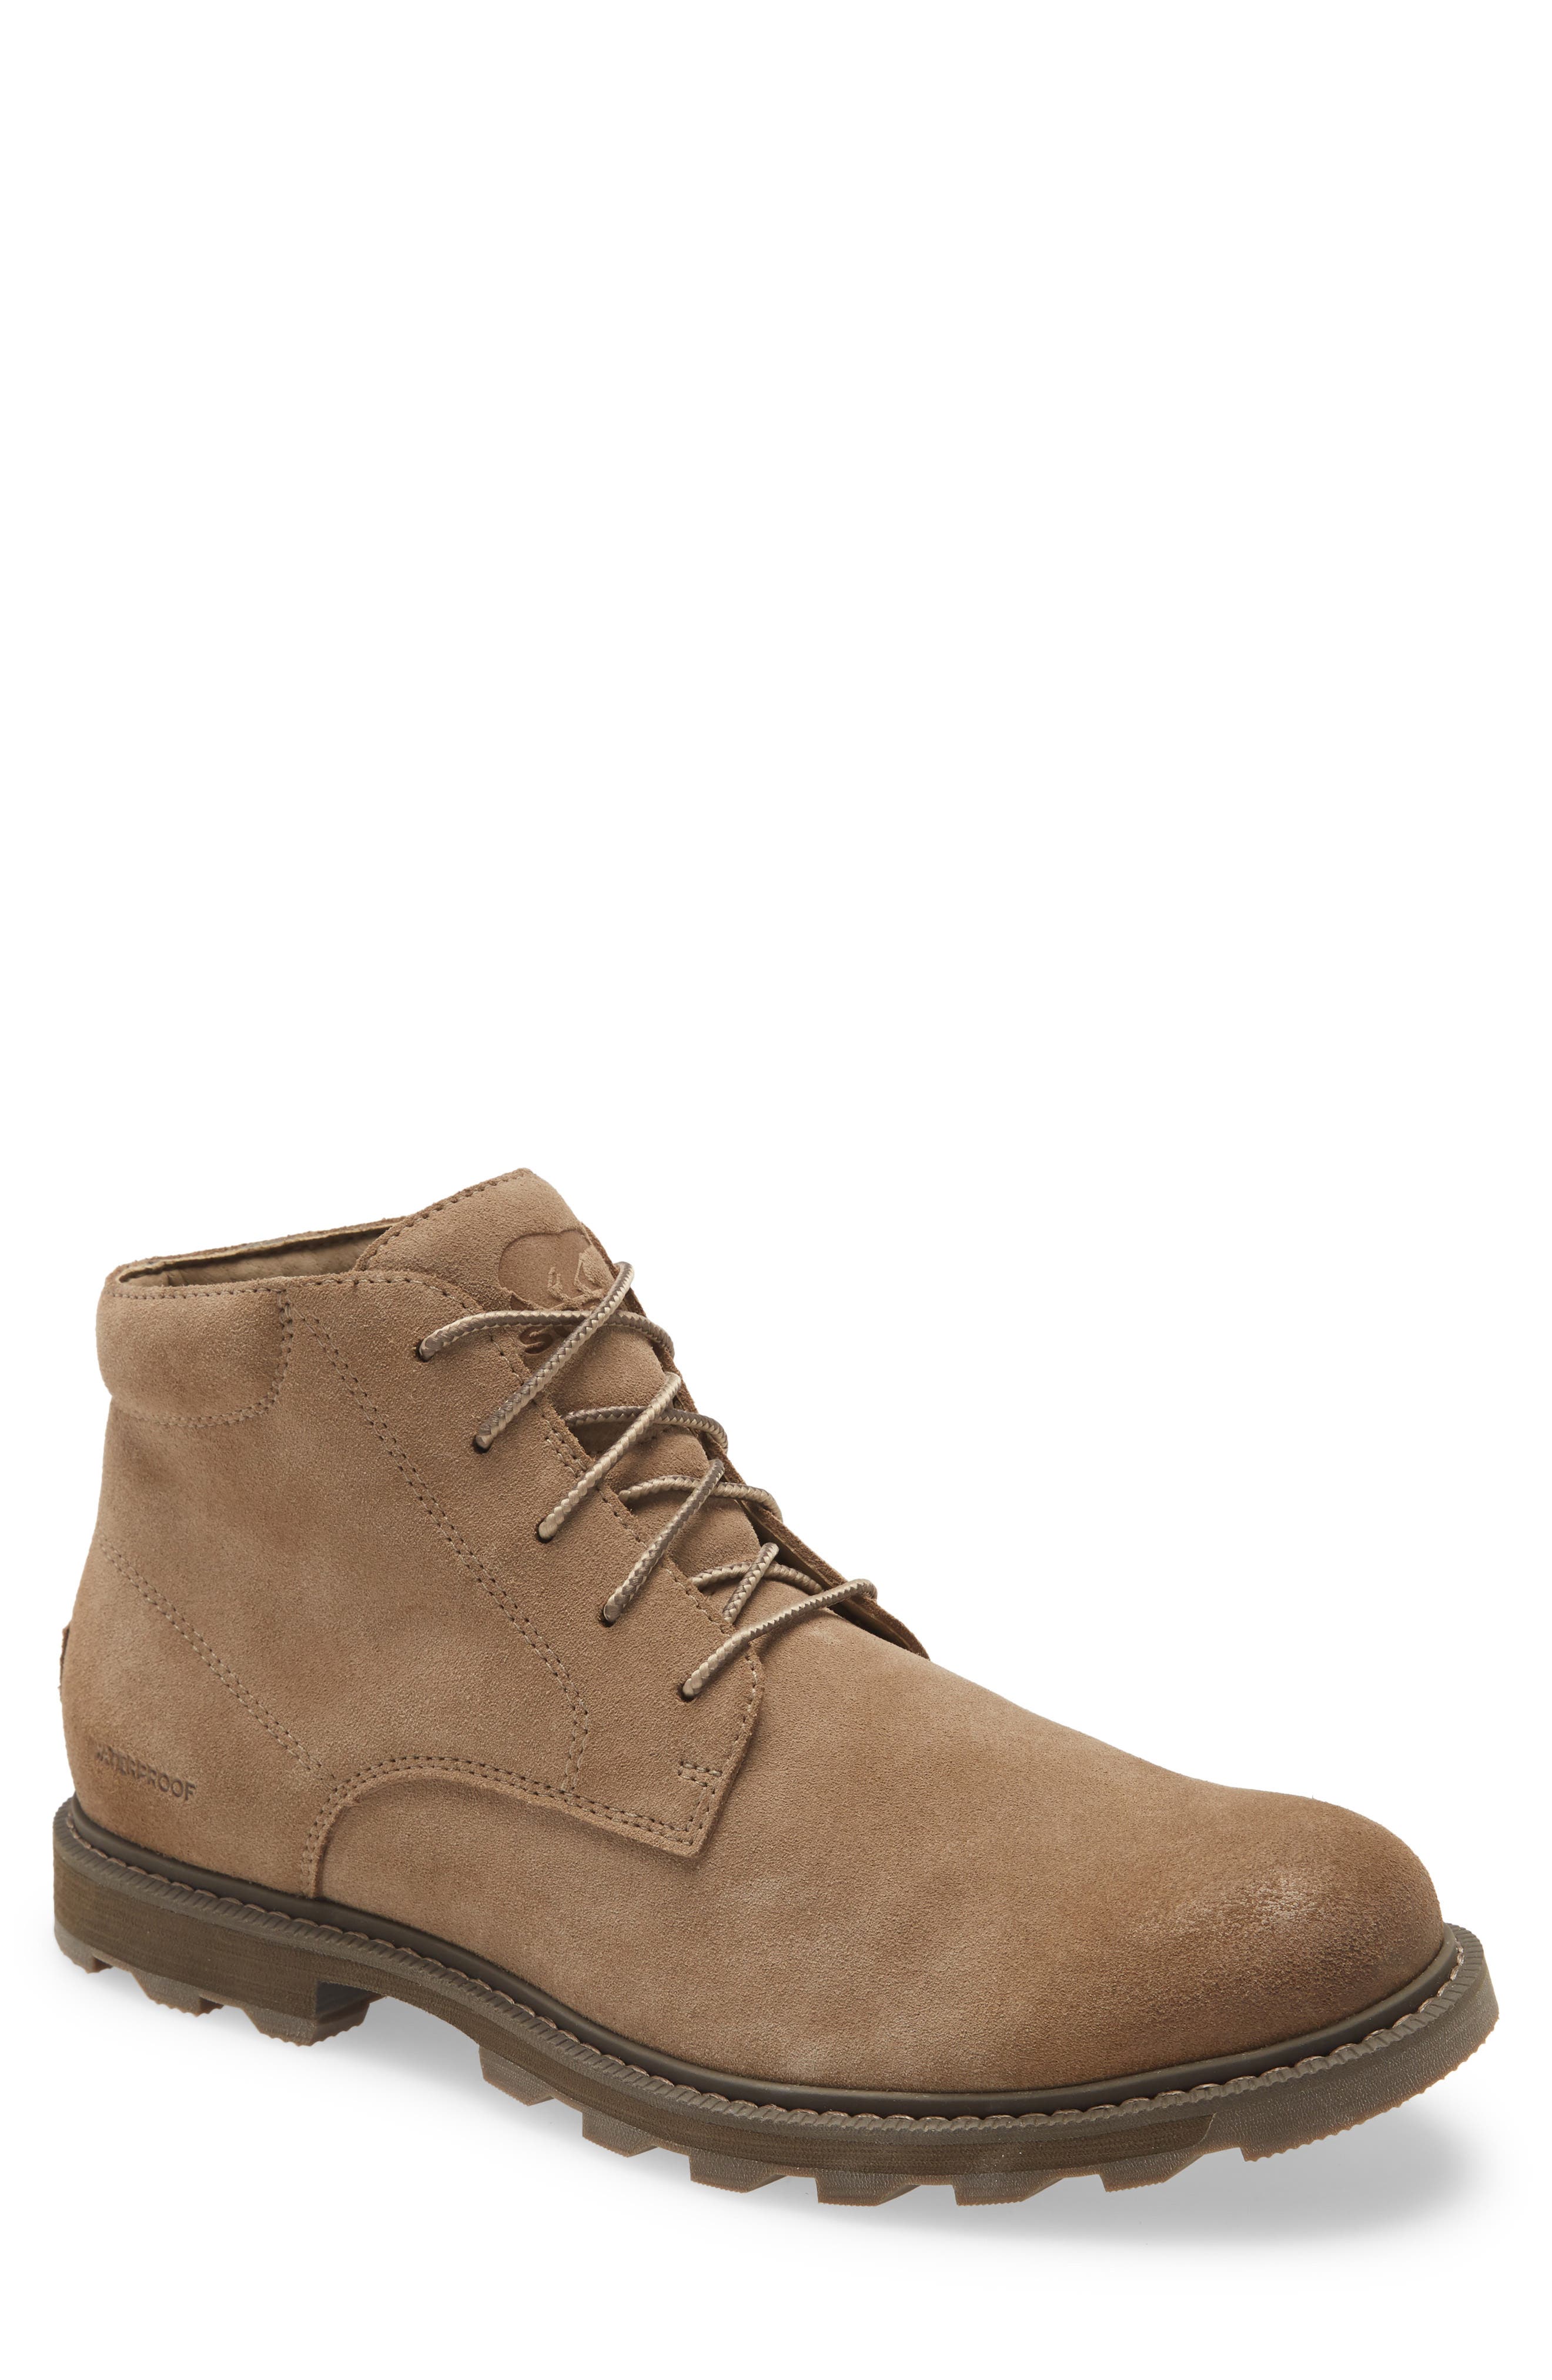 Mens Arch Support Boots | Nordstrom